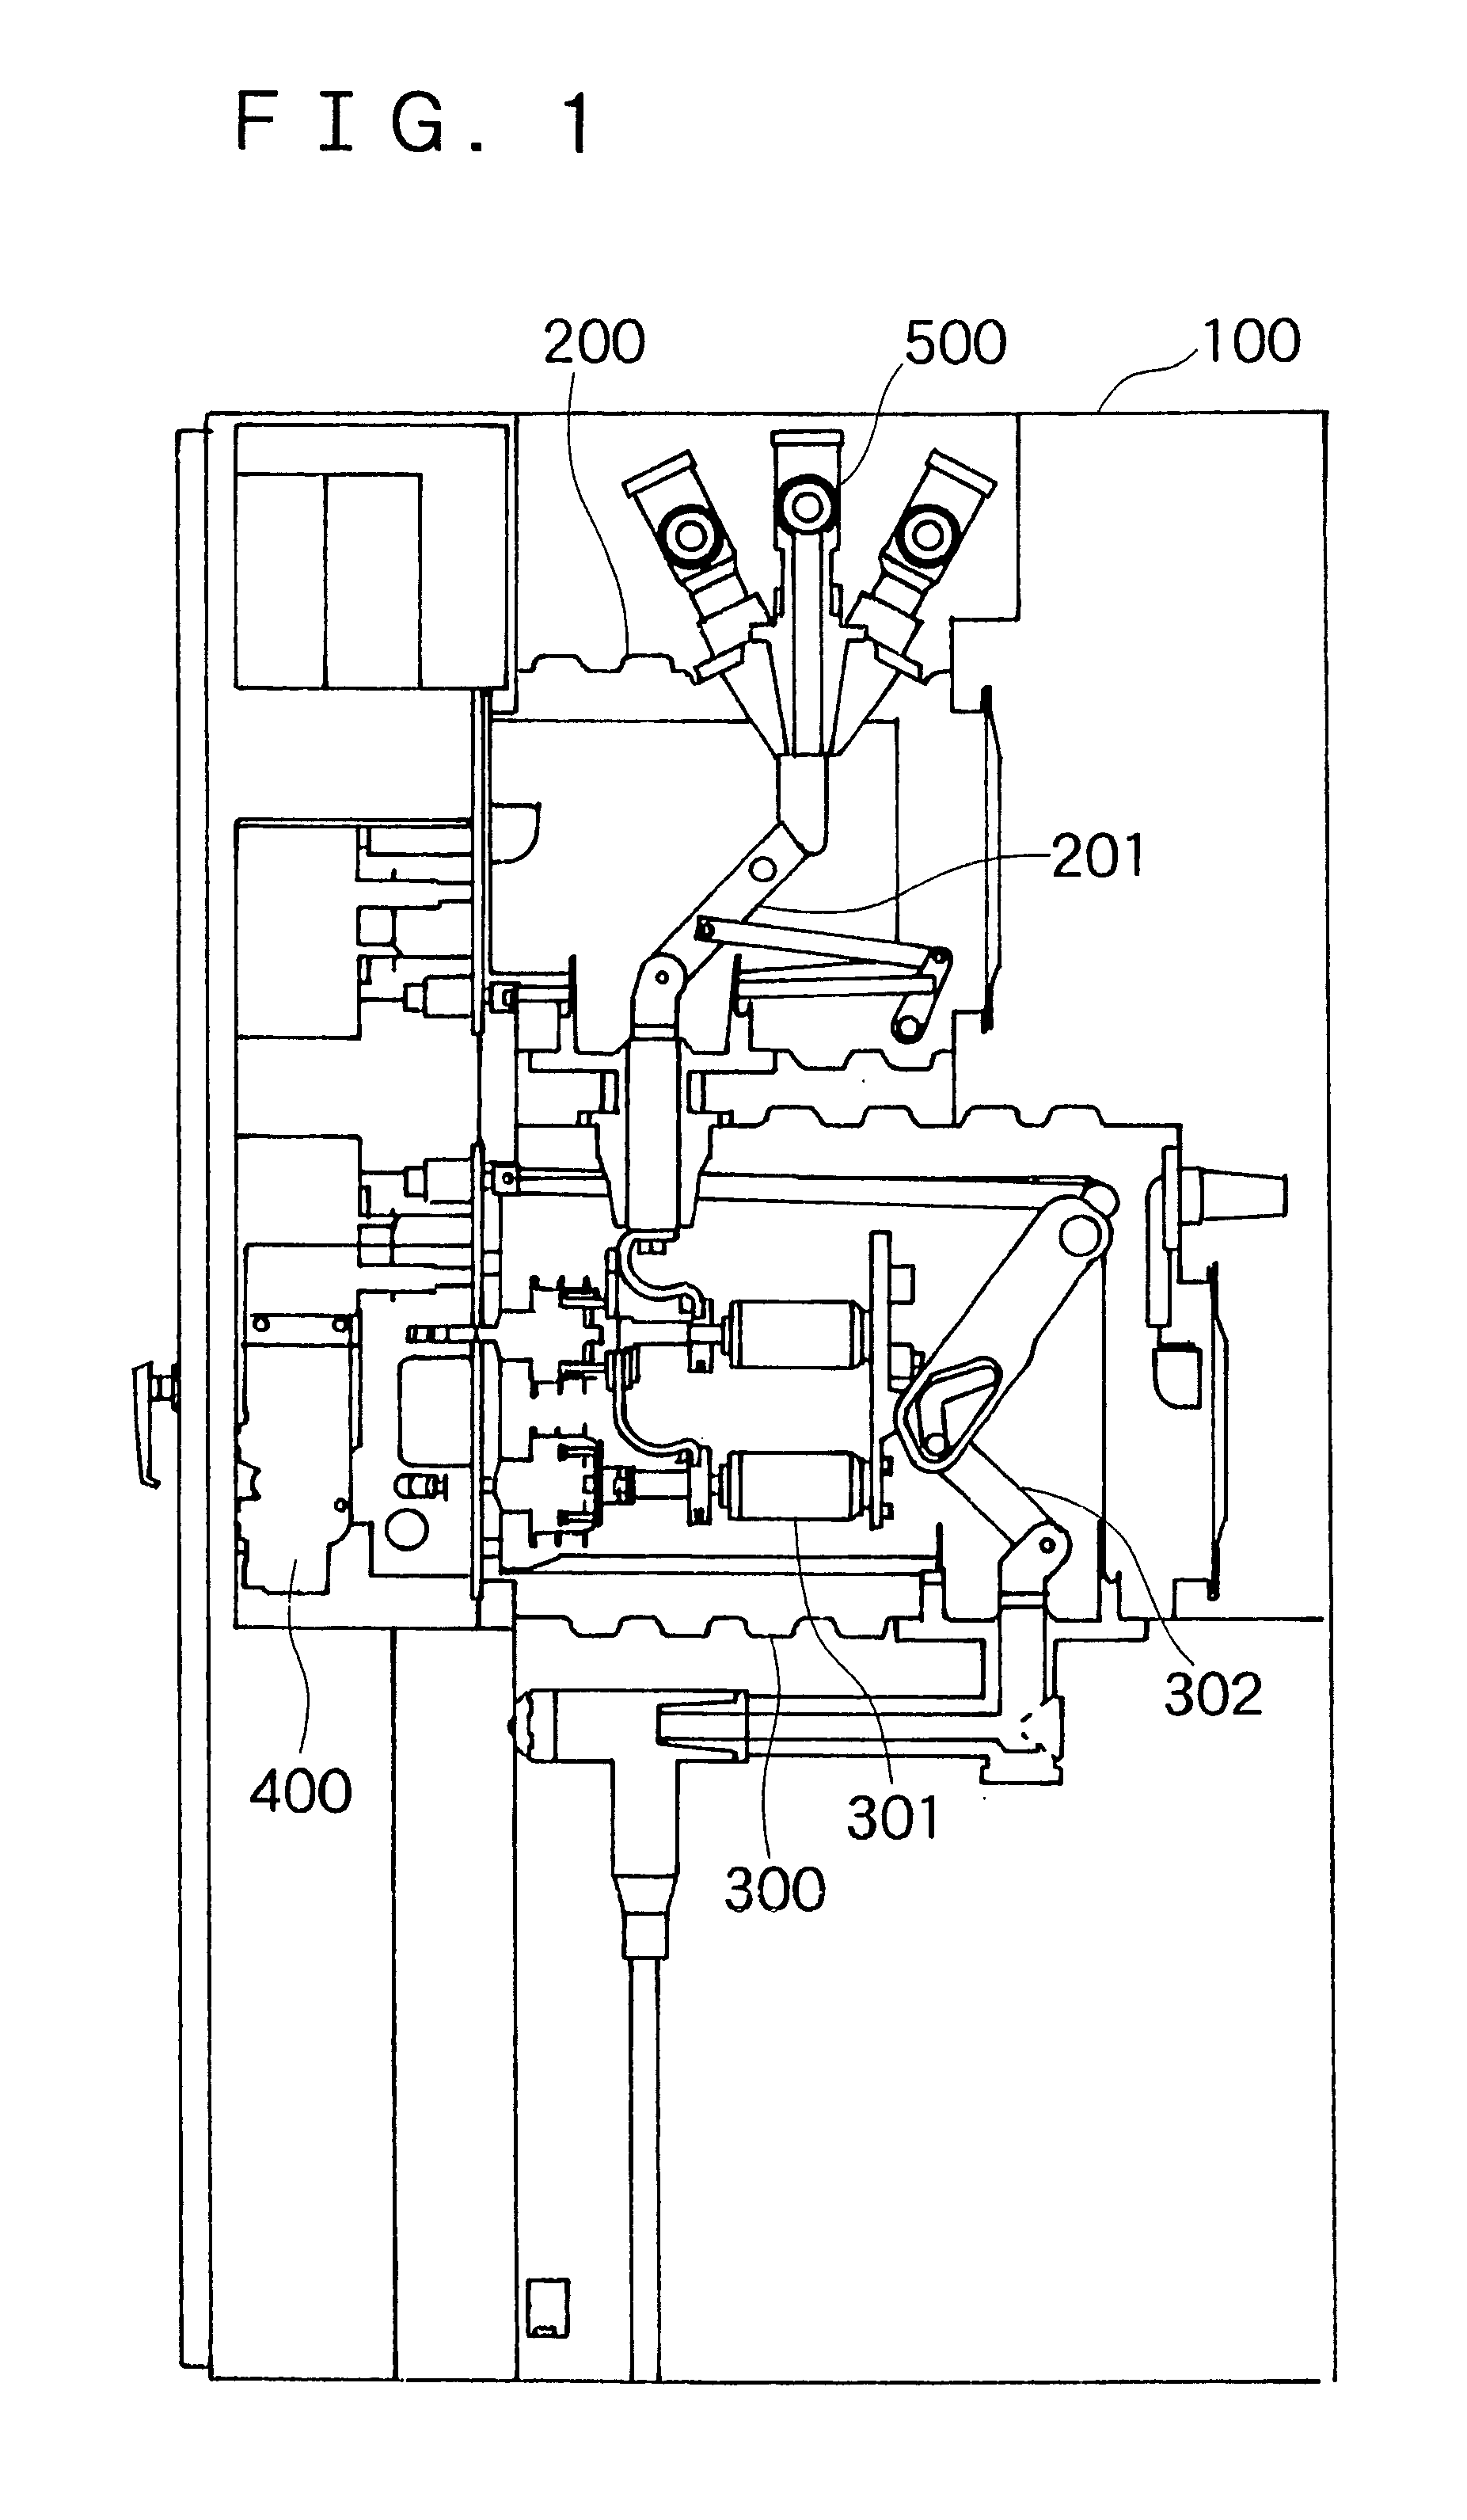 Gas-filled switching apparatus